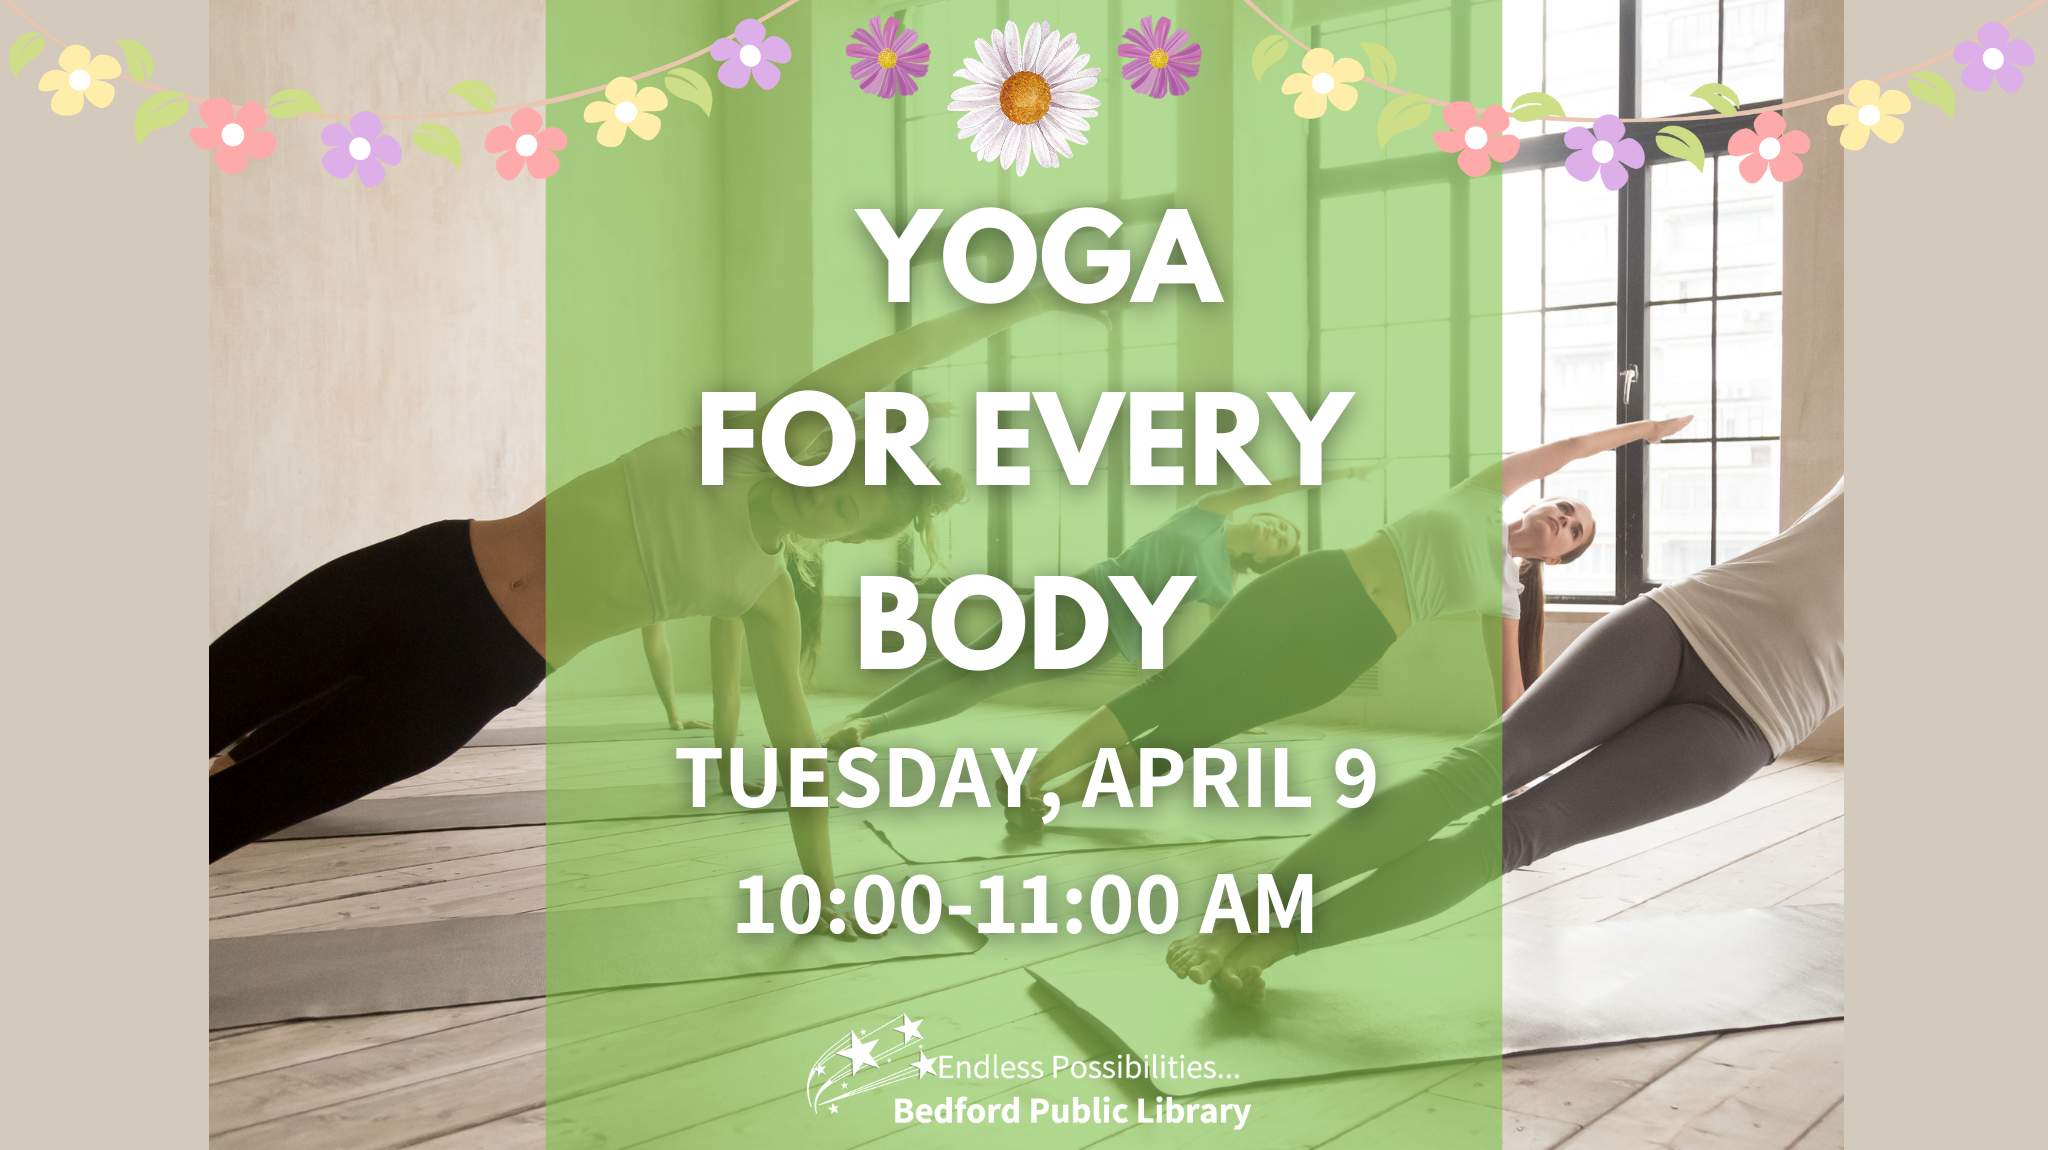 Yoga for every body on April 9th at 10am.